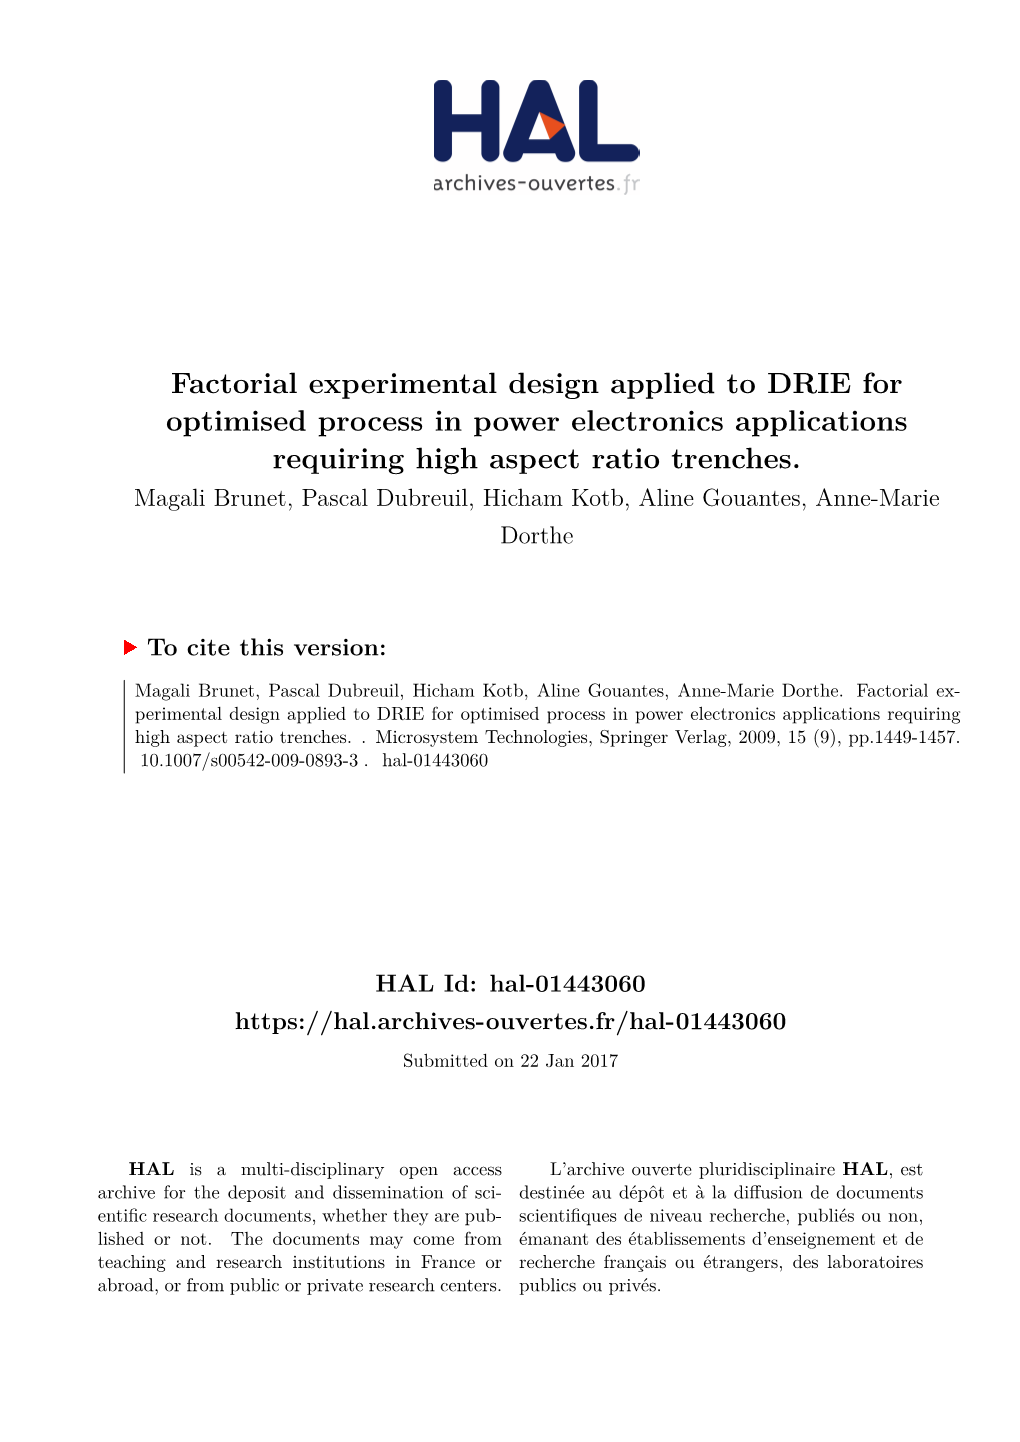 Factorial Experimental Design Applied to DRIE for Optimised Process in Power Electronics Applications Requiring High Aspect Ratio Trenches